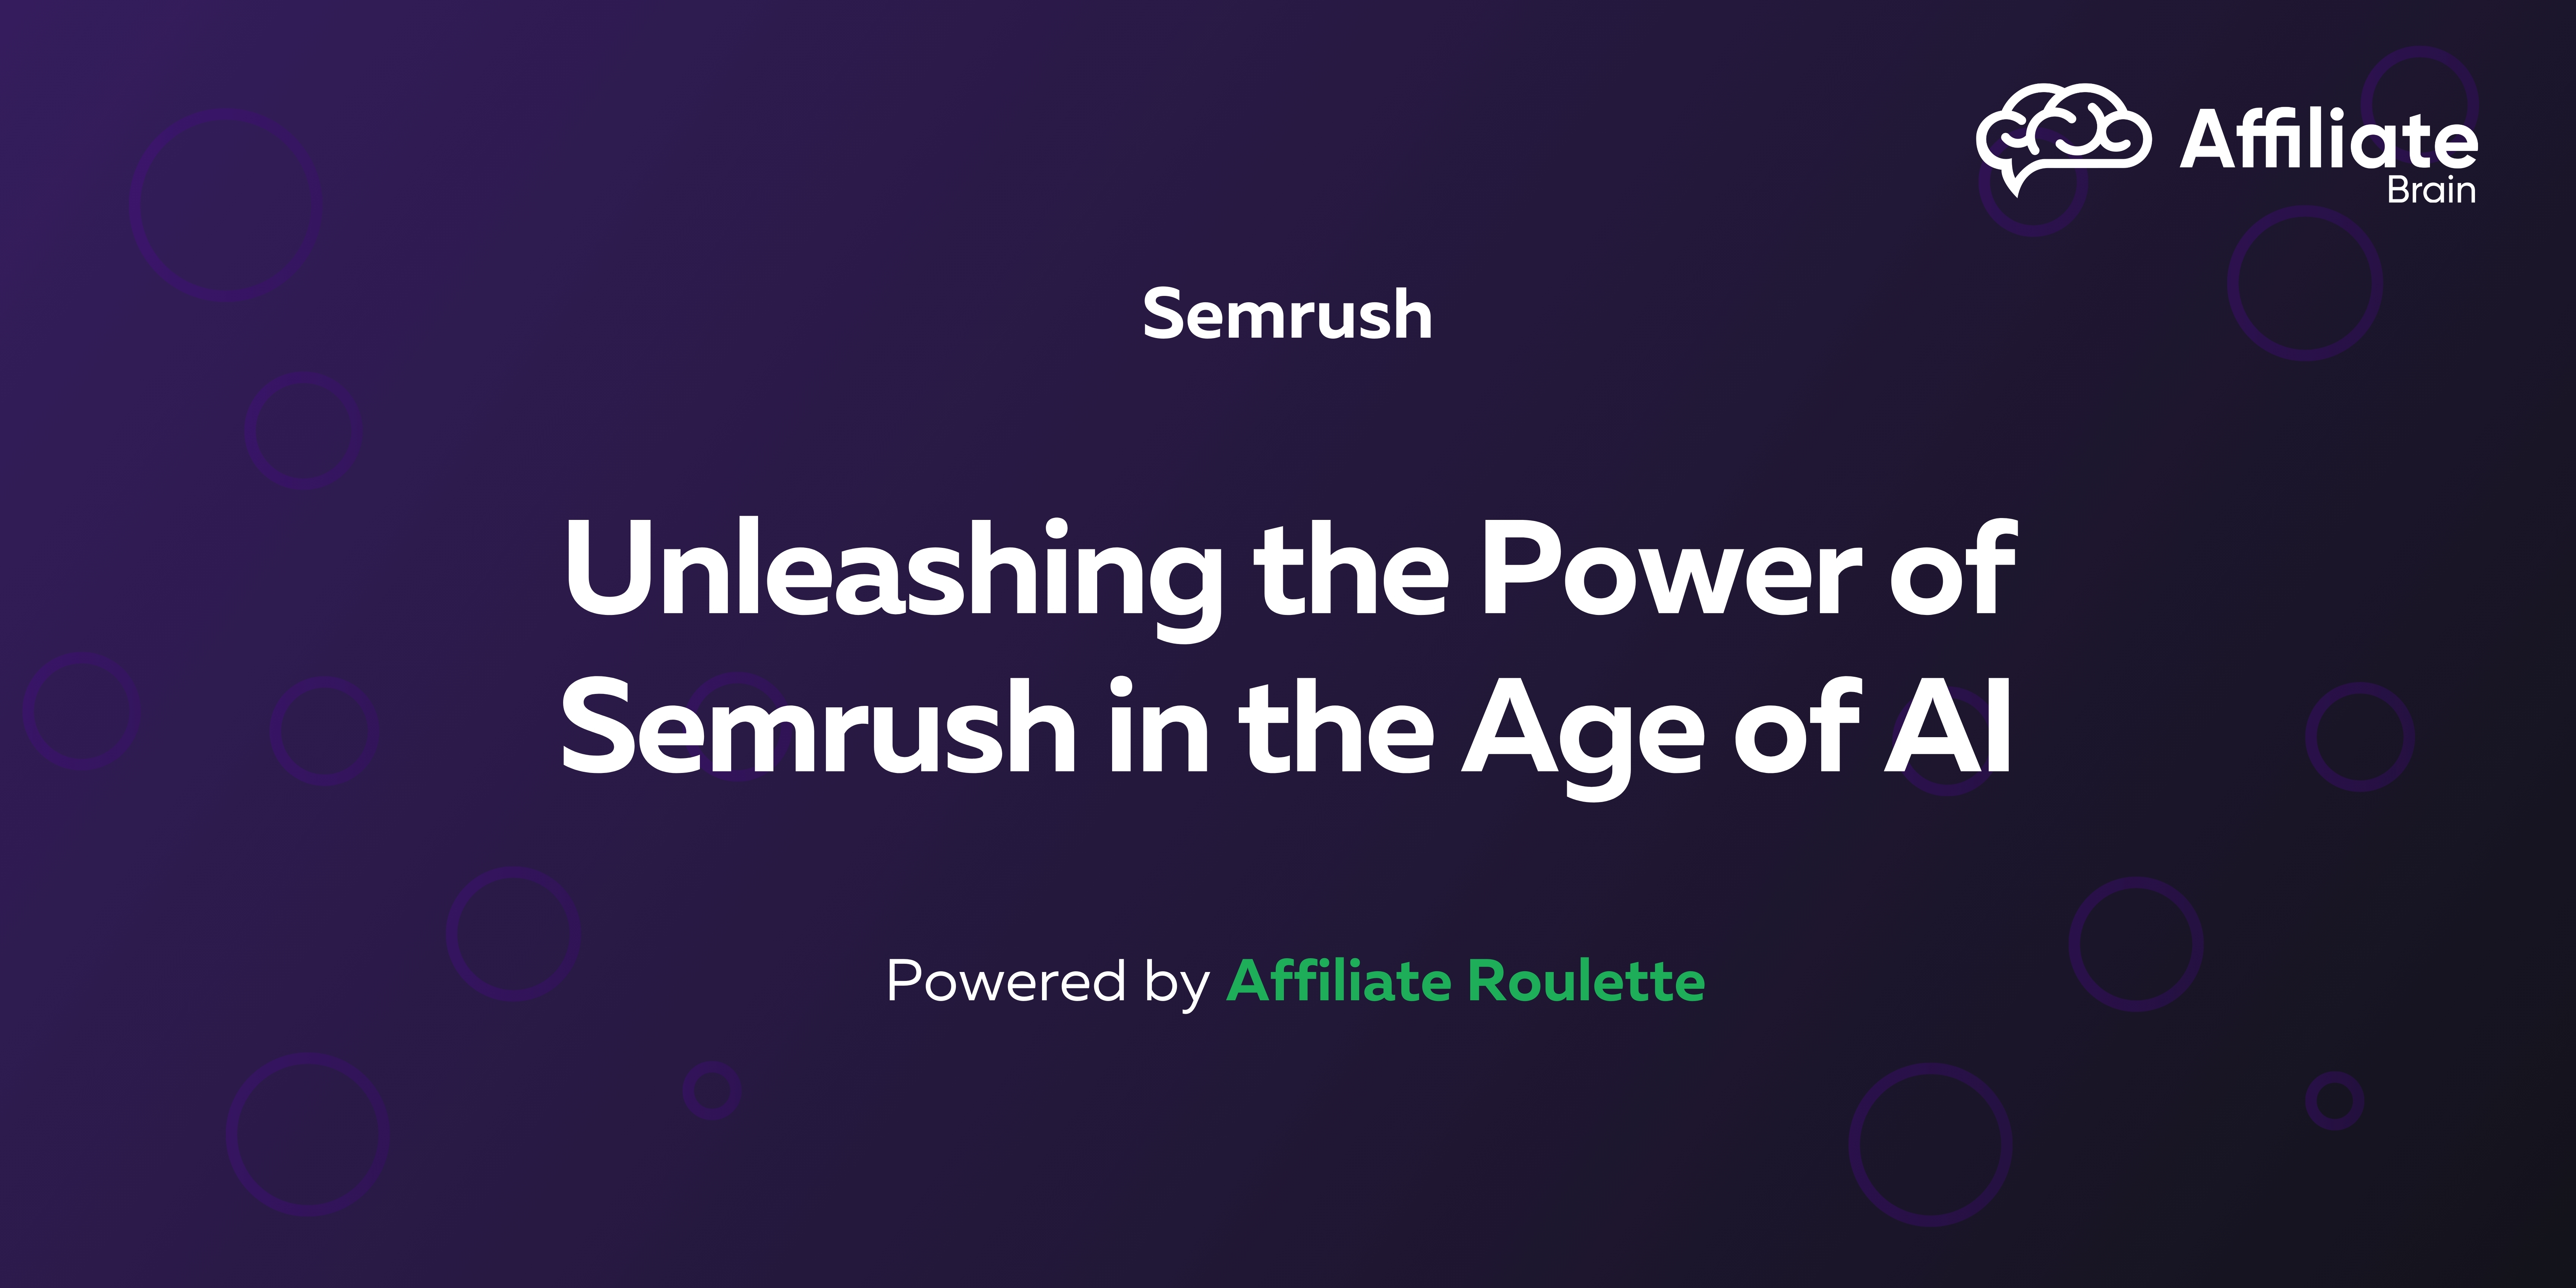 Unleashing the Power of Semrush in the Age of AI